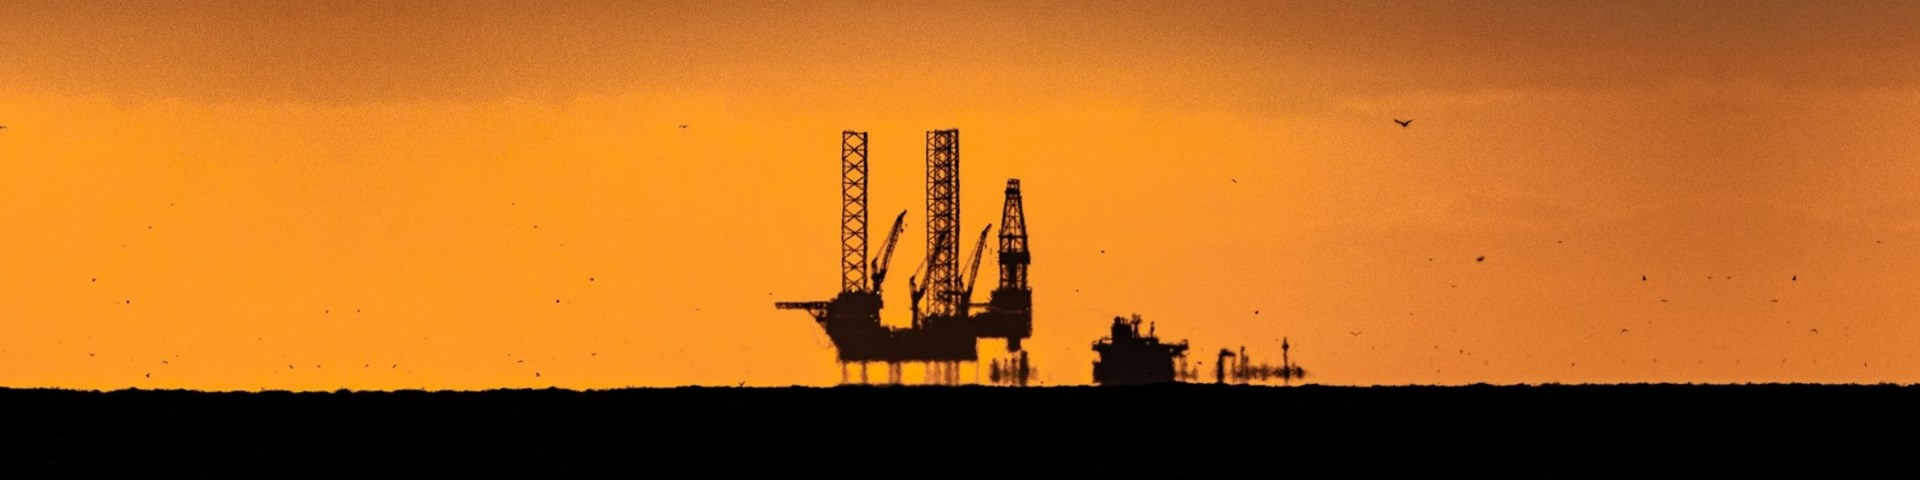 An oil rig in the ocean with the sun setting